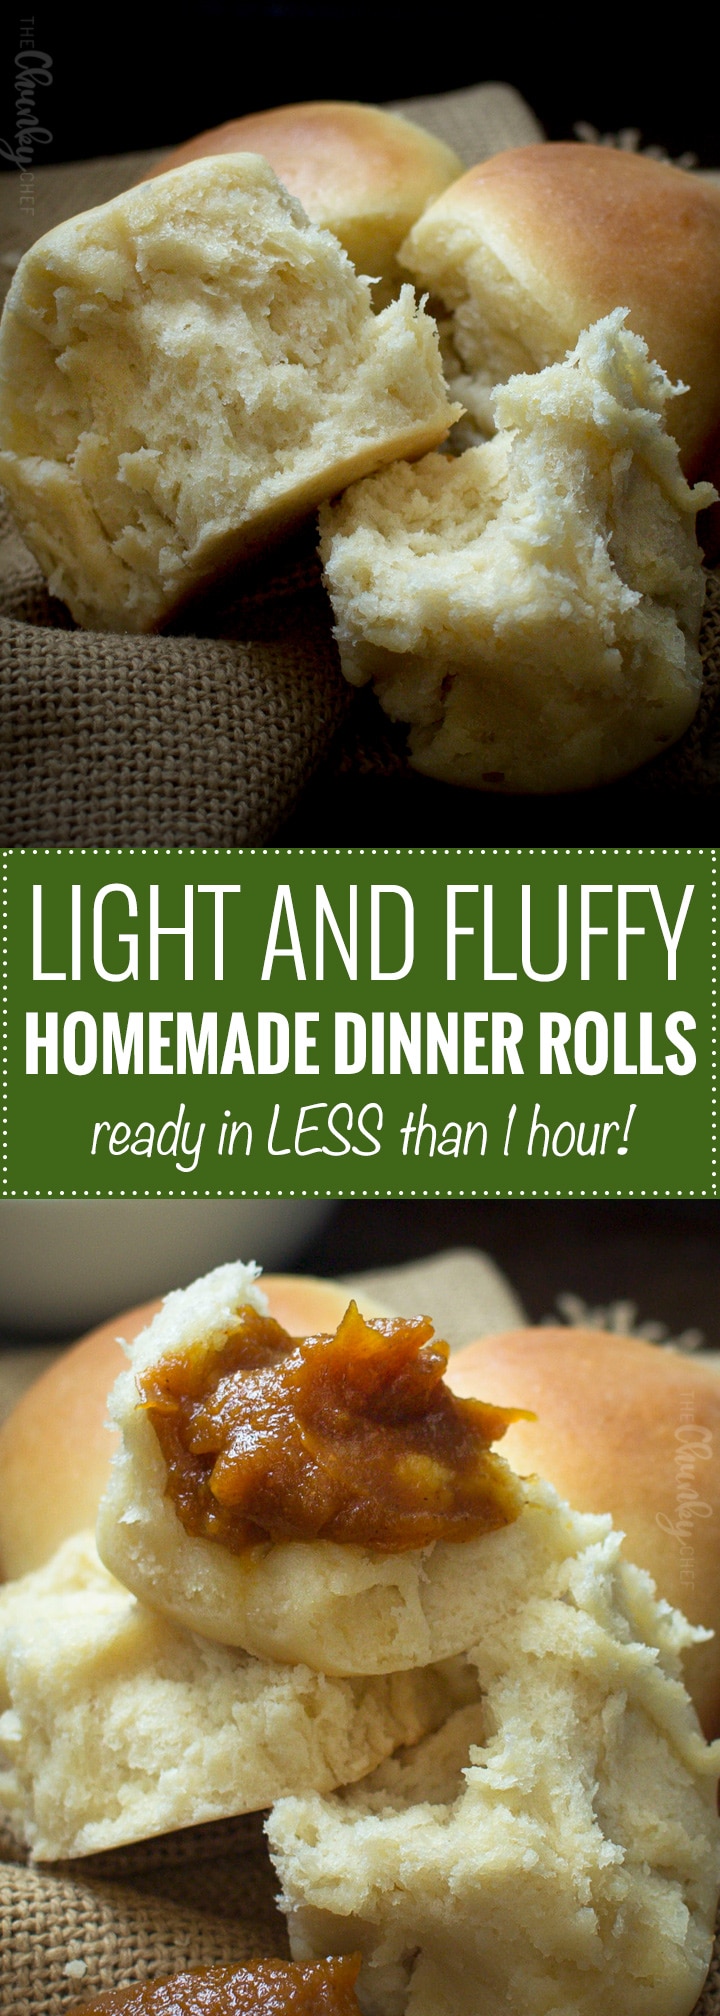 Classic Dinner Rolls - In less than 1 hour! | Everything you love about the soft, fluffy, classic homemade dinner rolls, but made in SO much less time. Less than 1 hour is all you need! |The Chunky Chef | #dinnerrolls #homemaderolls #thanksgiving #fromscratch #yeastrolls #rolls